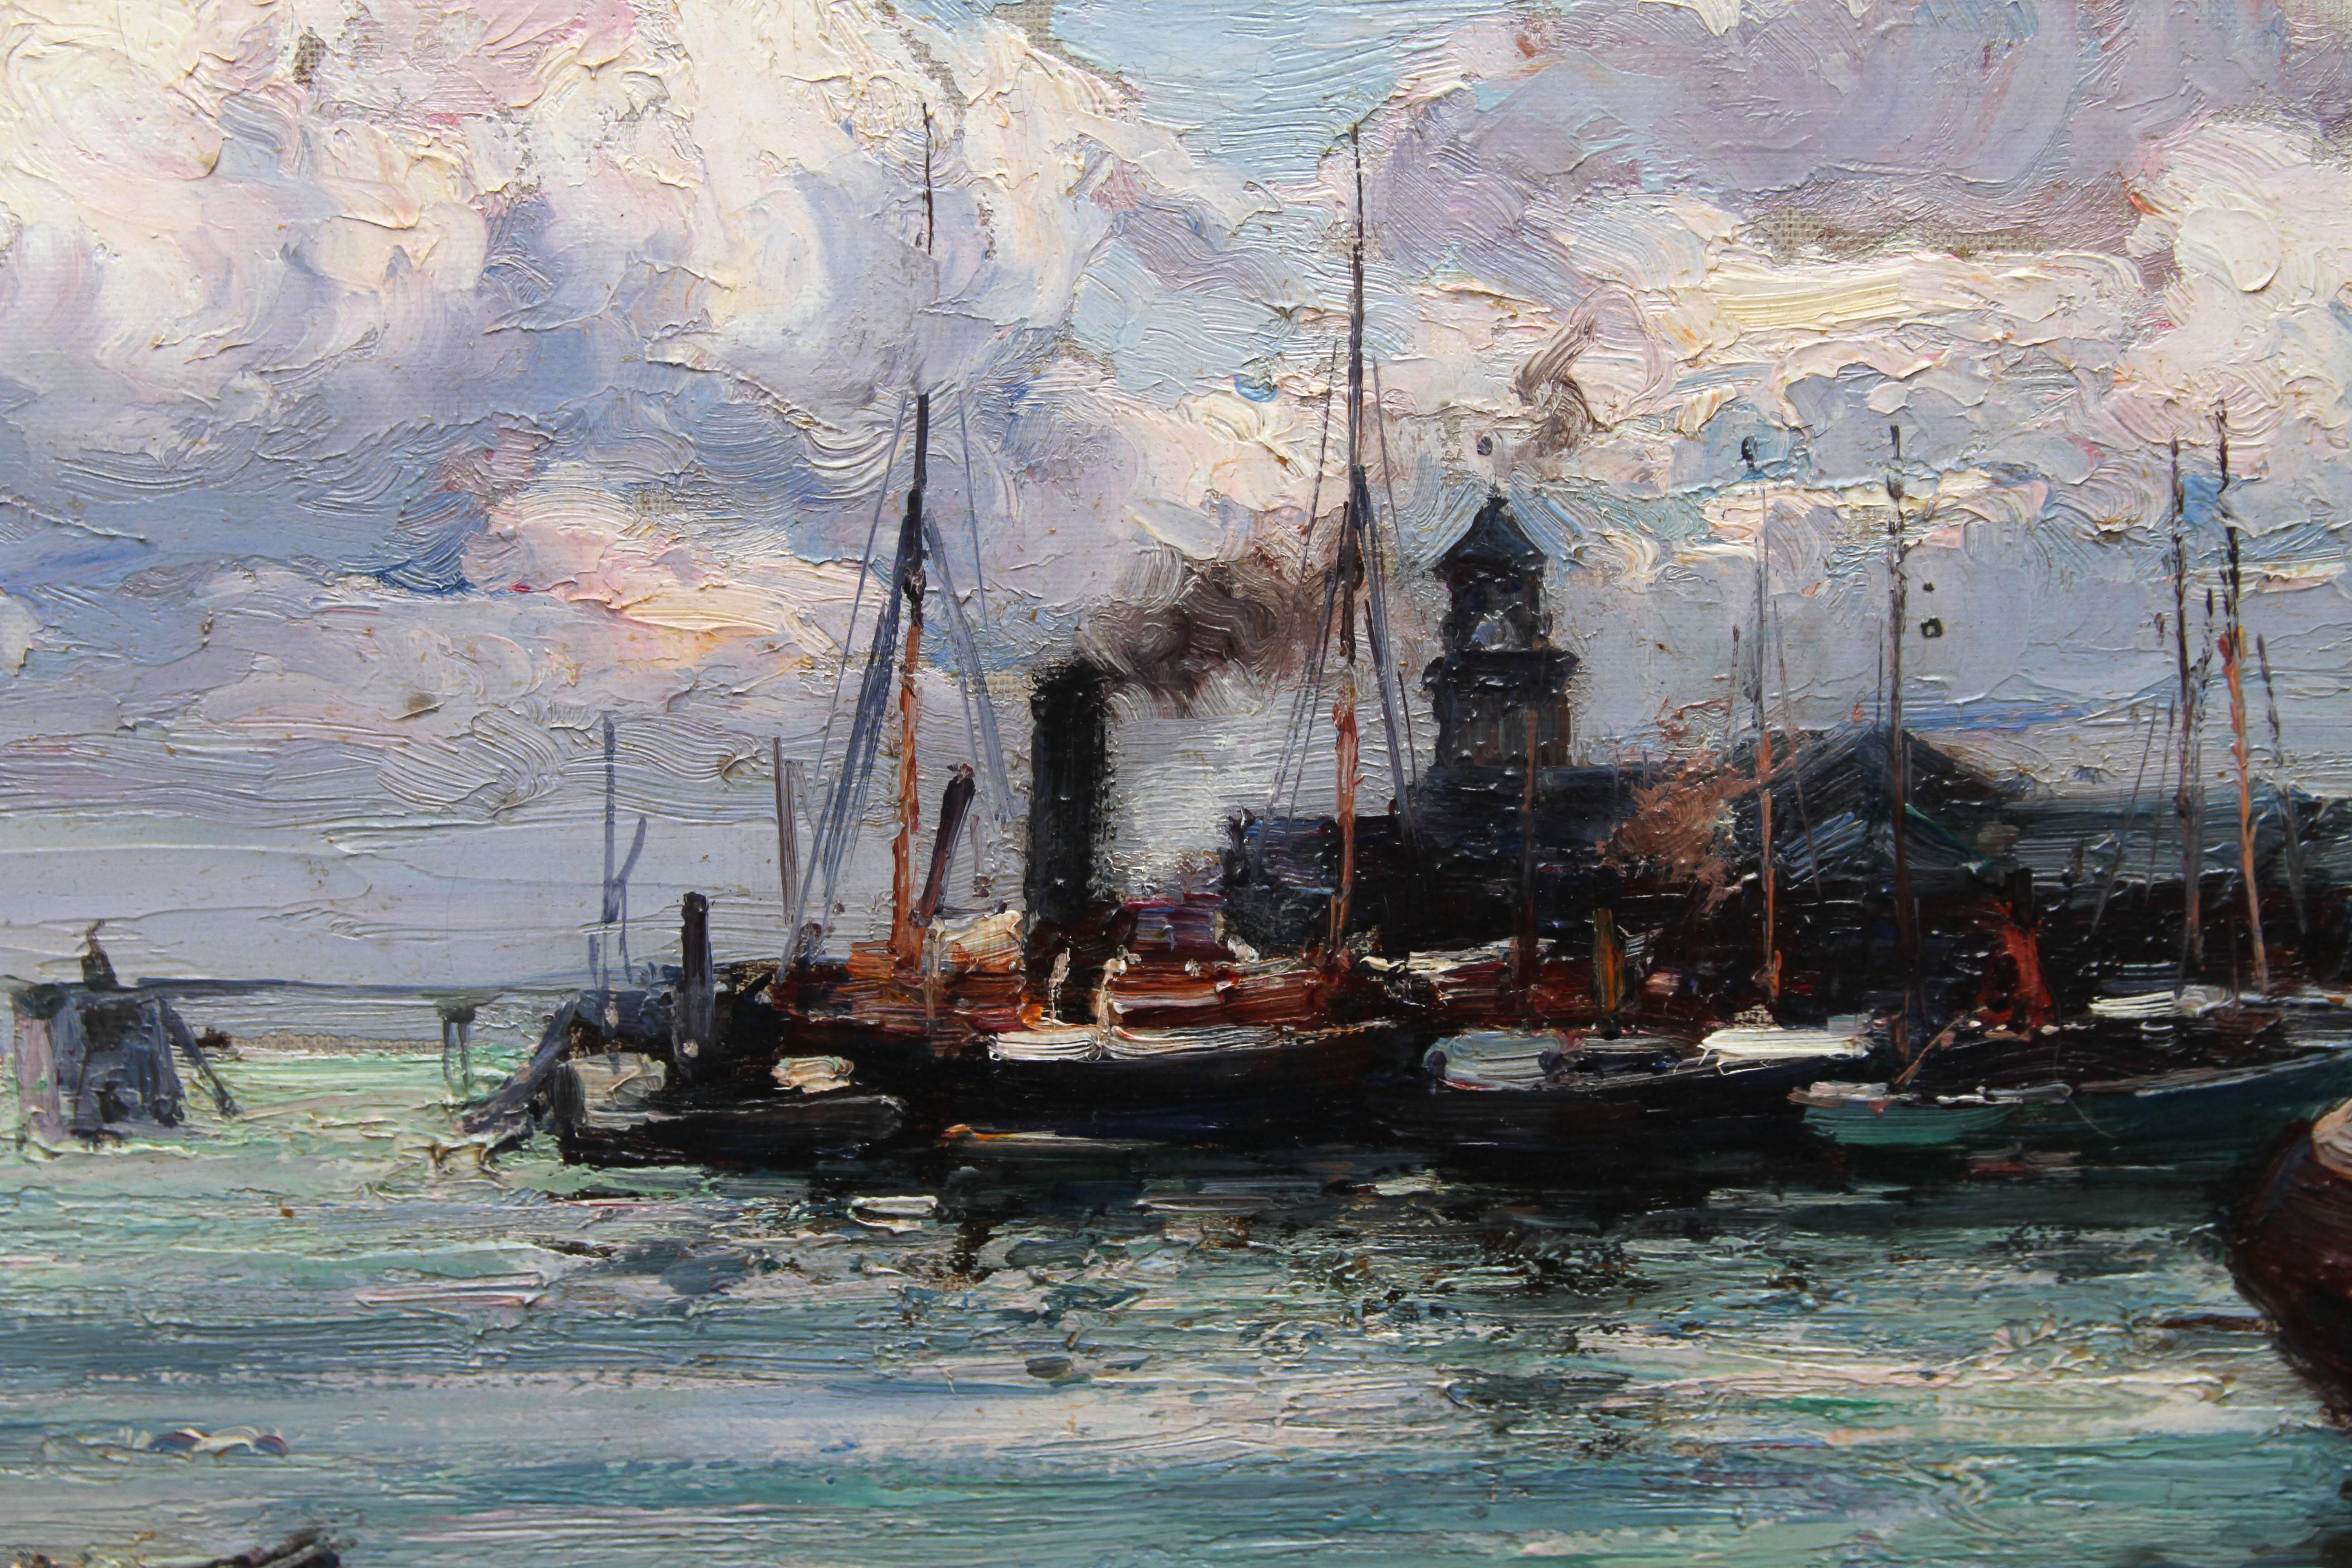 Boats at Harbour - Scottish art Victorian Impressionist oil painting seascape - Gray Landscape Painting by Joseph Milne